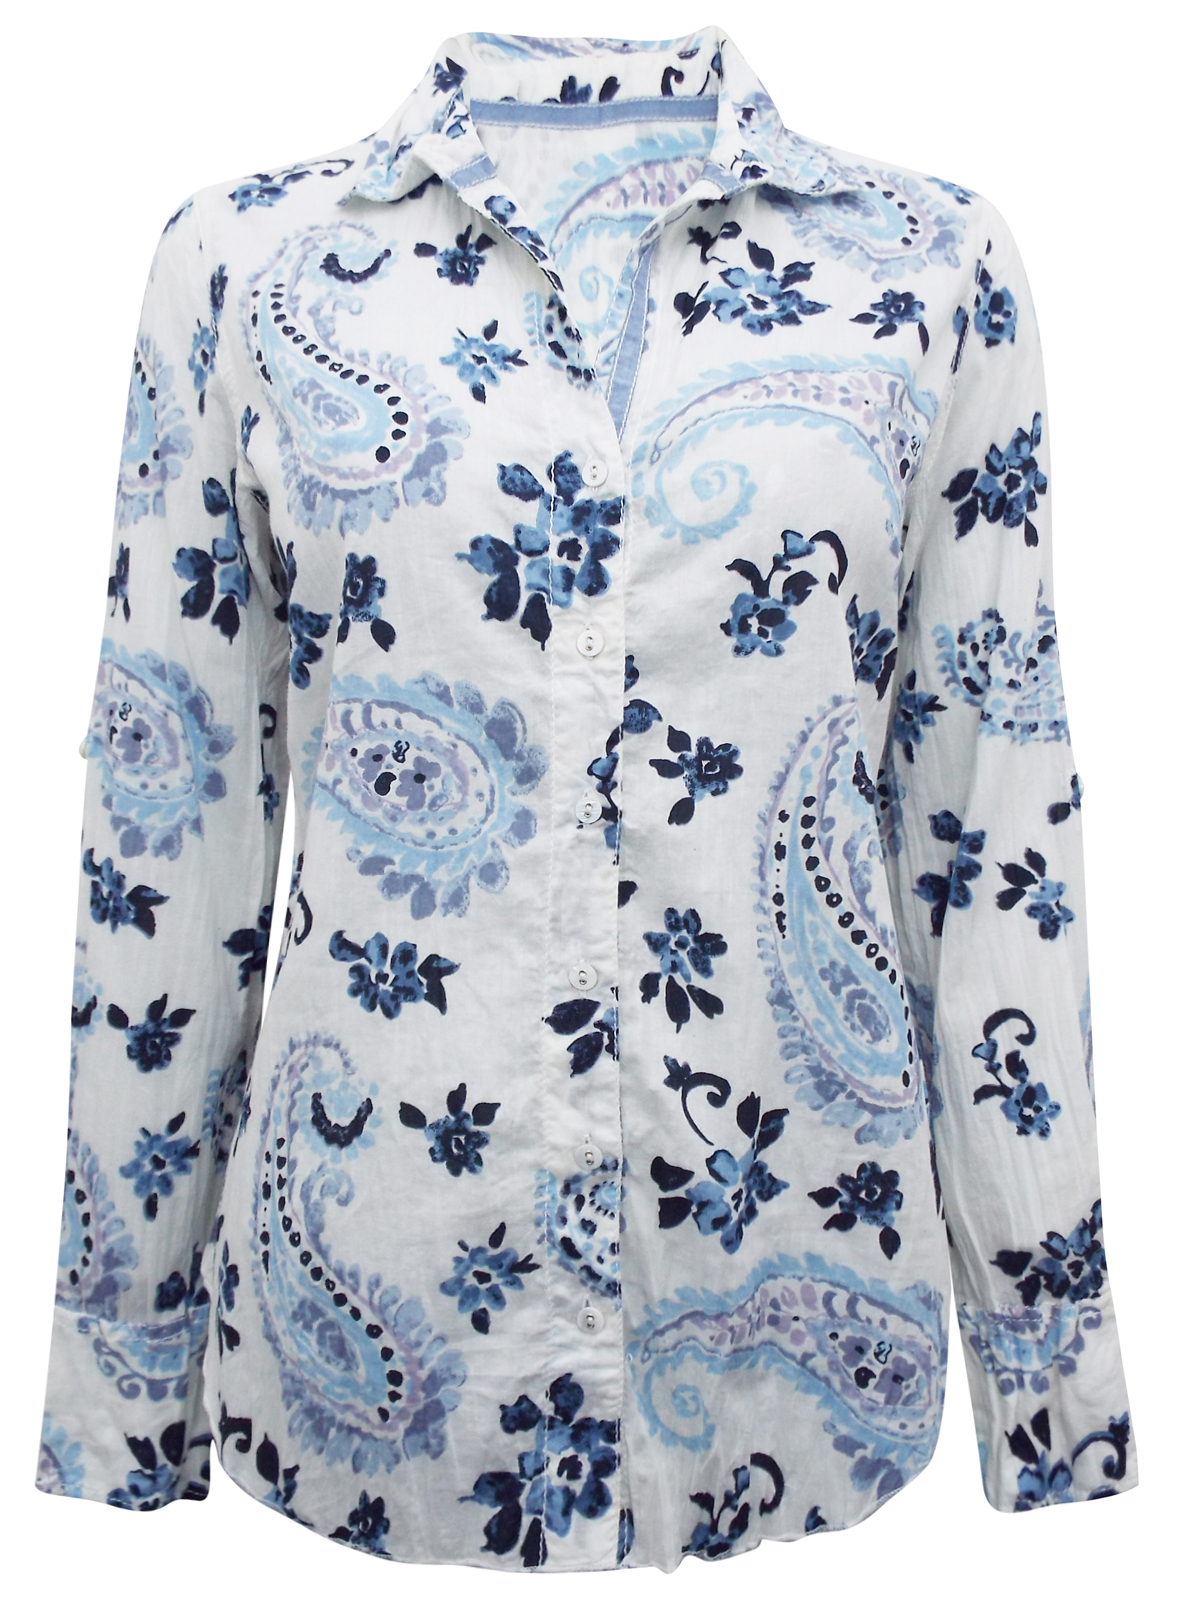 CINO - - CINO BLUE Bluebell Paisley Floral Crinkle Cotton Shirt - Size ...